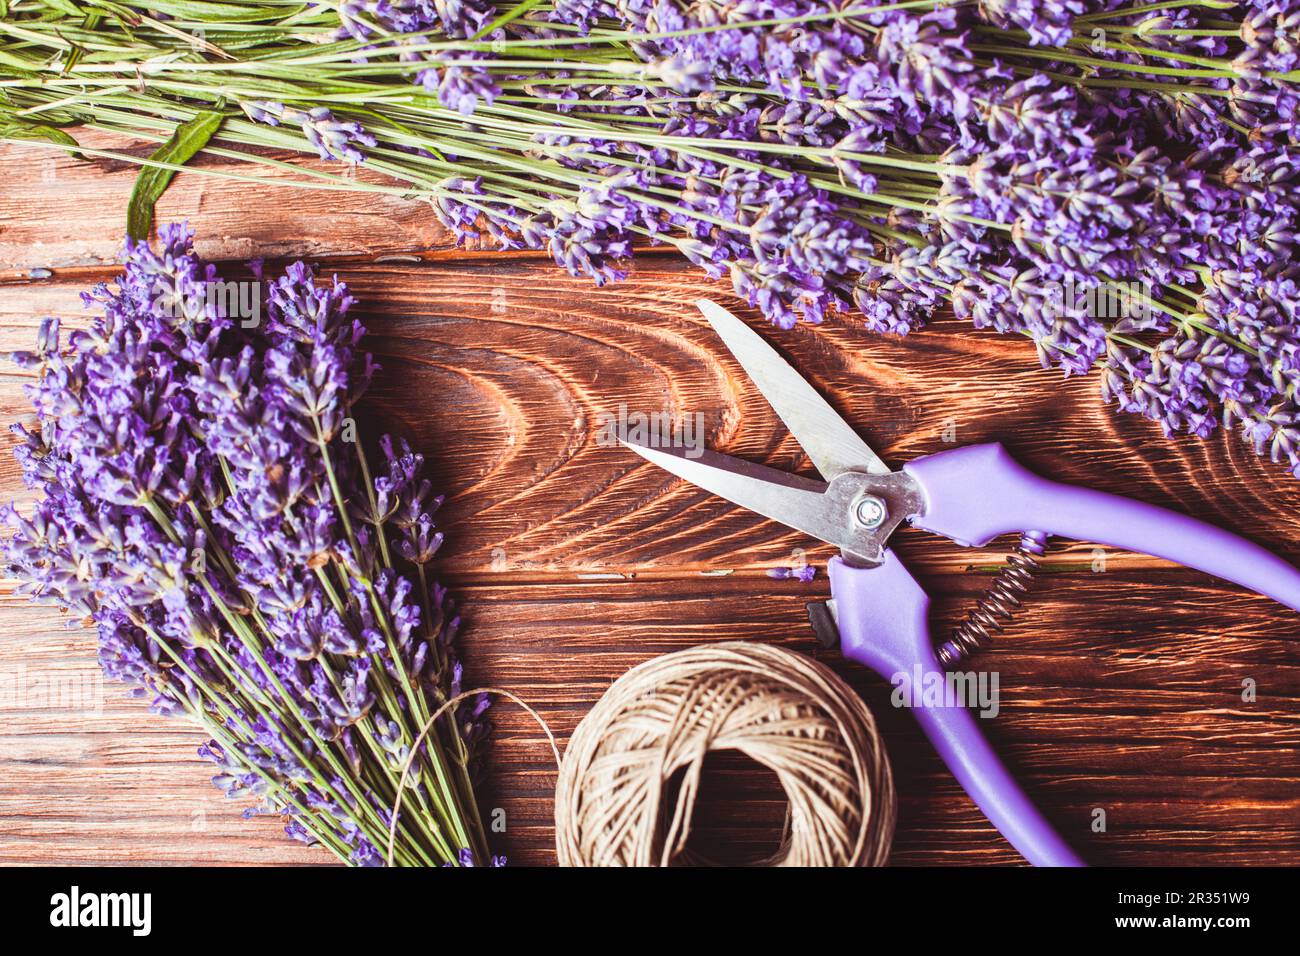 Cut Dry Lavender Flowers In A Small Wicker Basket In The Garden Next To  Blooming Lavender Bushes And Summer Hat. Stock Photo, Picture and Royalty  Free Image. Image 188853135.